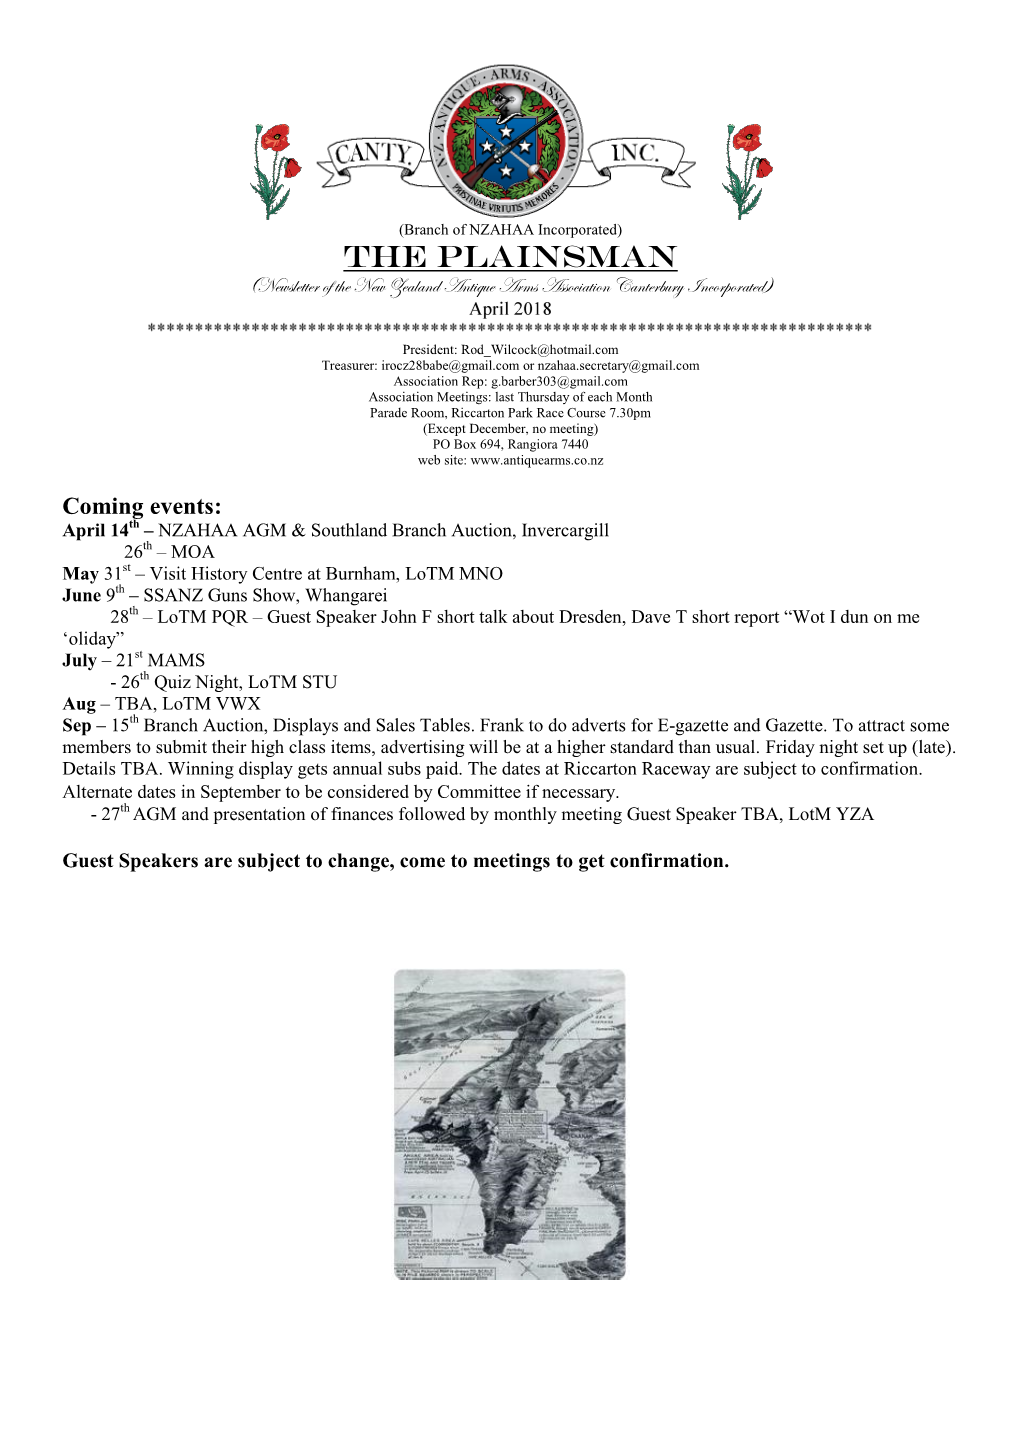 THE PLAINSMAN (Newsletter of the New Zealand Antique Arms Association Canterbury Incorporated)